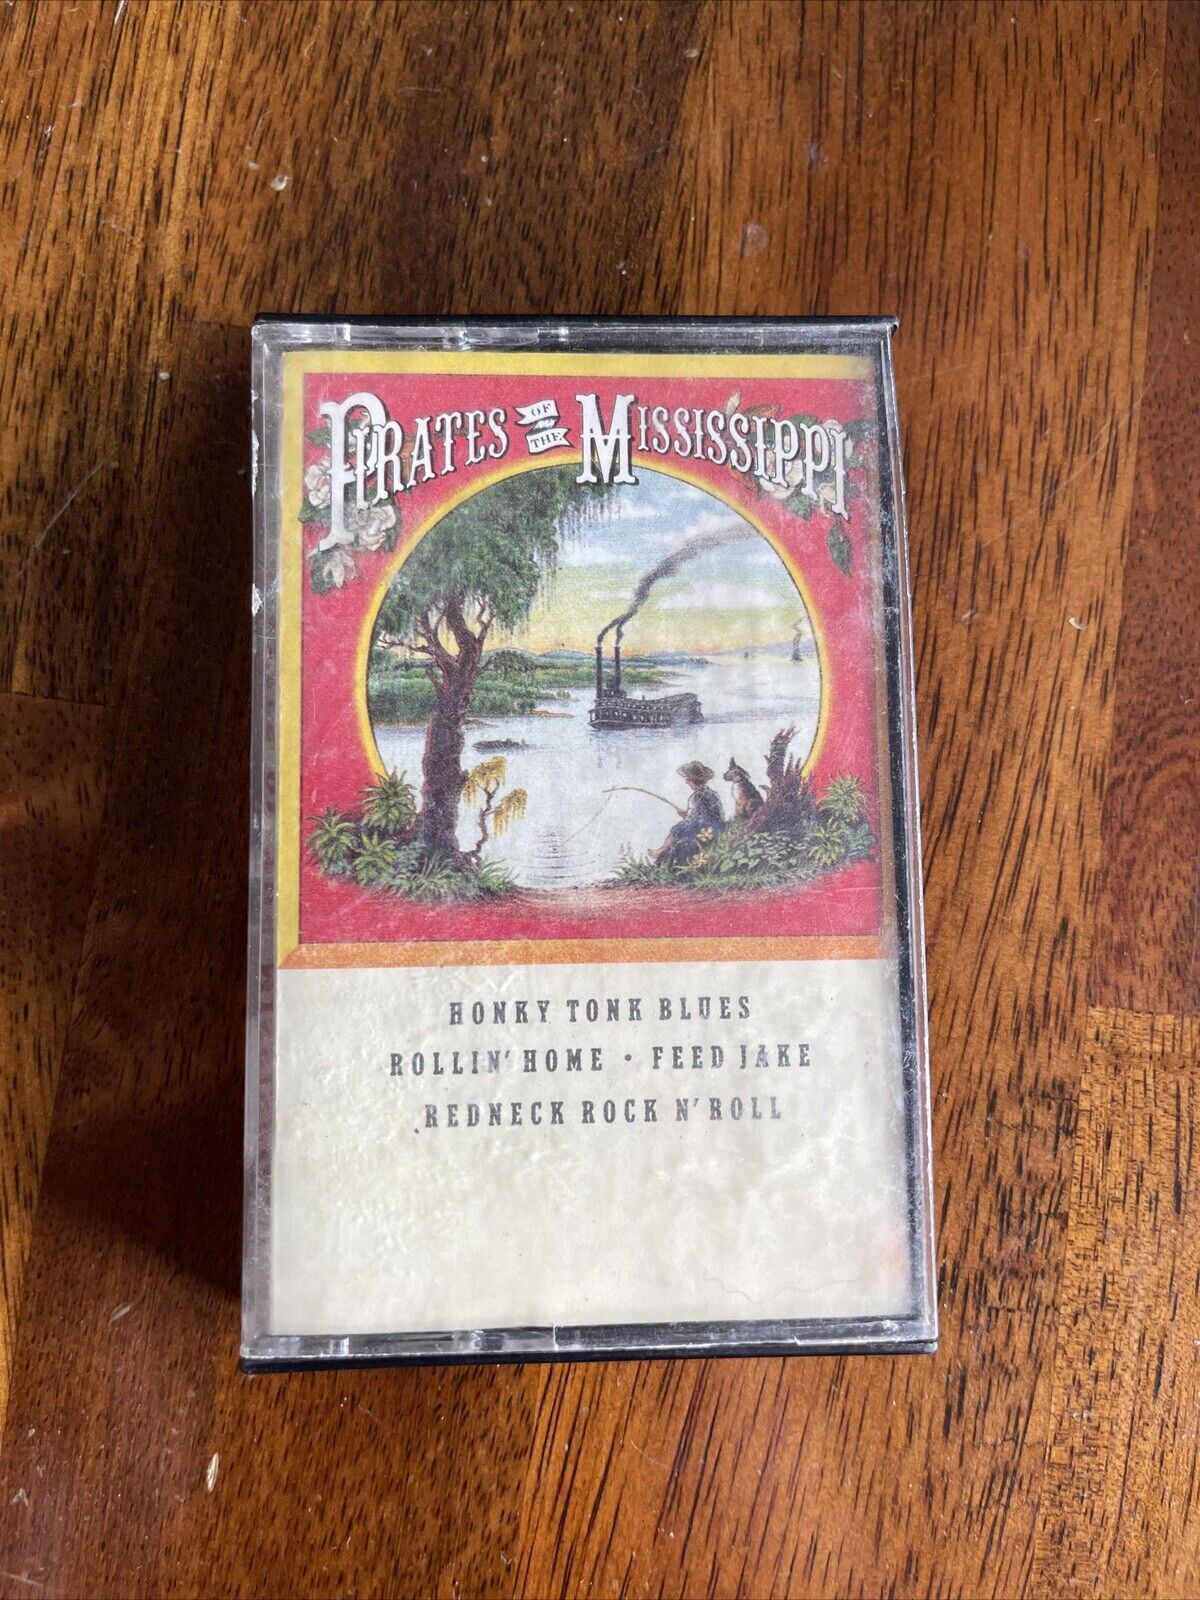 Pirates of the Mississippi by Pirates of the Mississippi (Cassette 1990 Capitol)